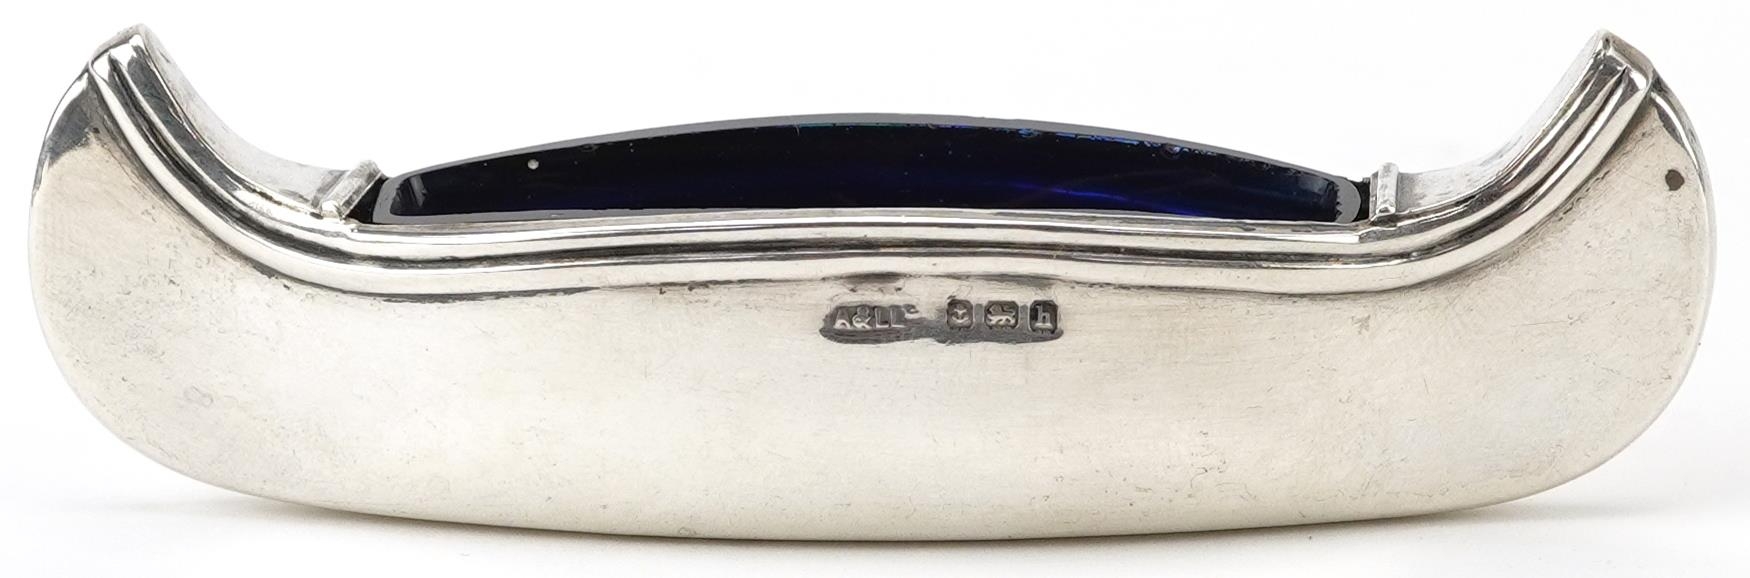 Adie & Lovekin Ltd, Edwardian silver open table salt in the form of a boat, with blue glass liner, - Image 3 of 5